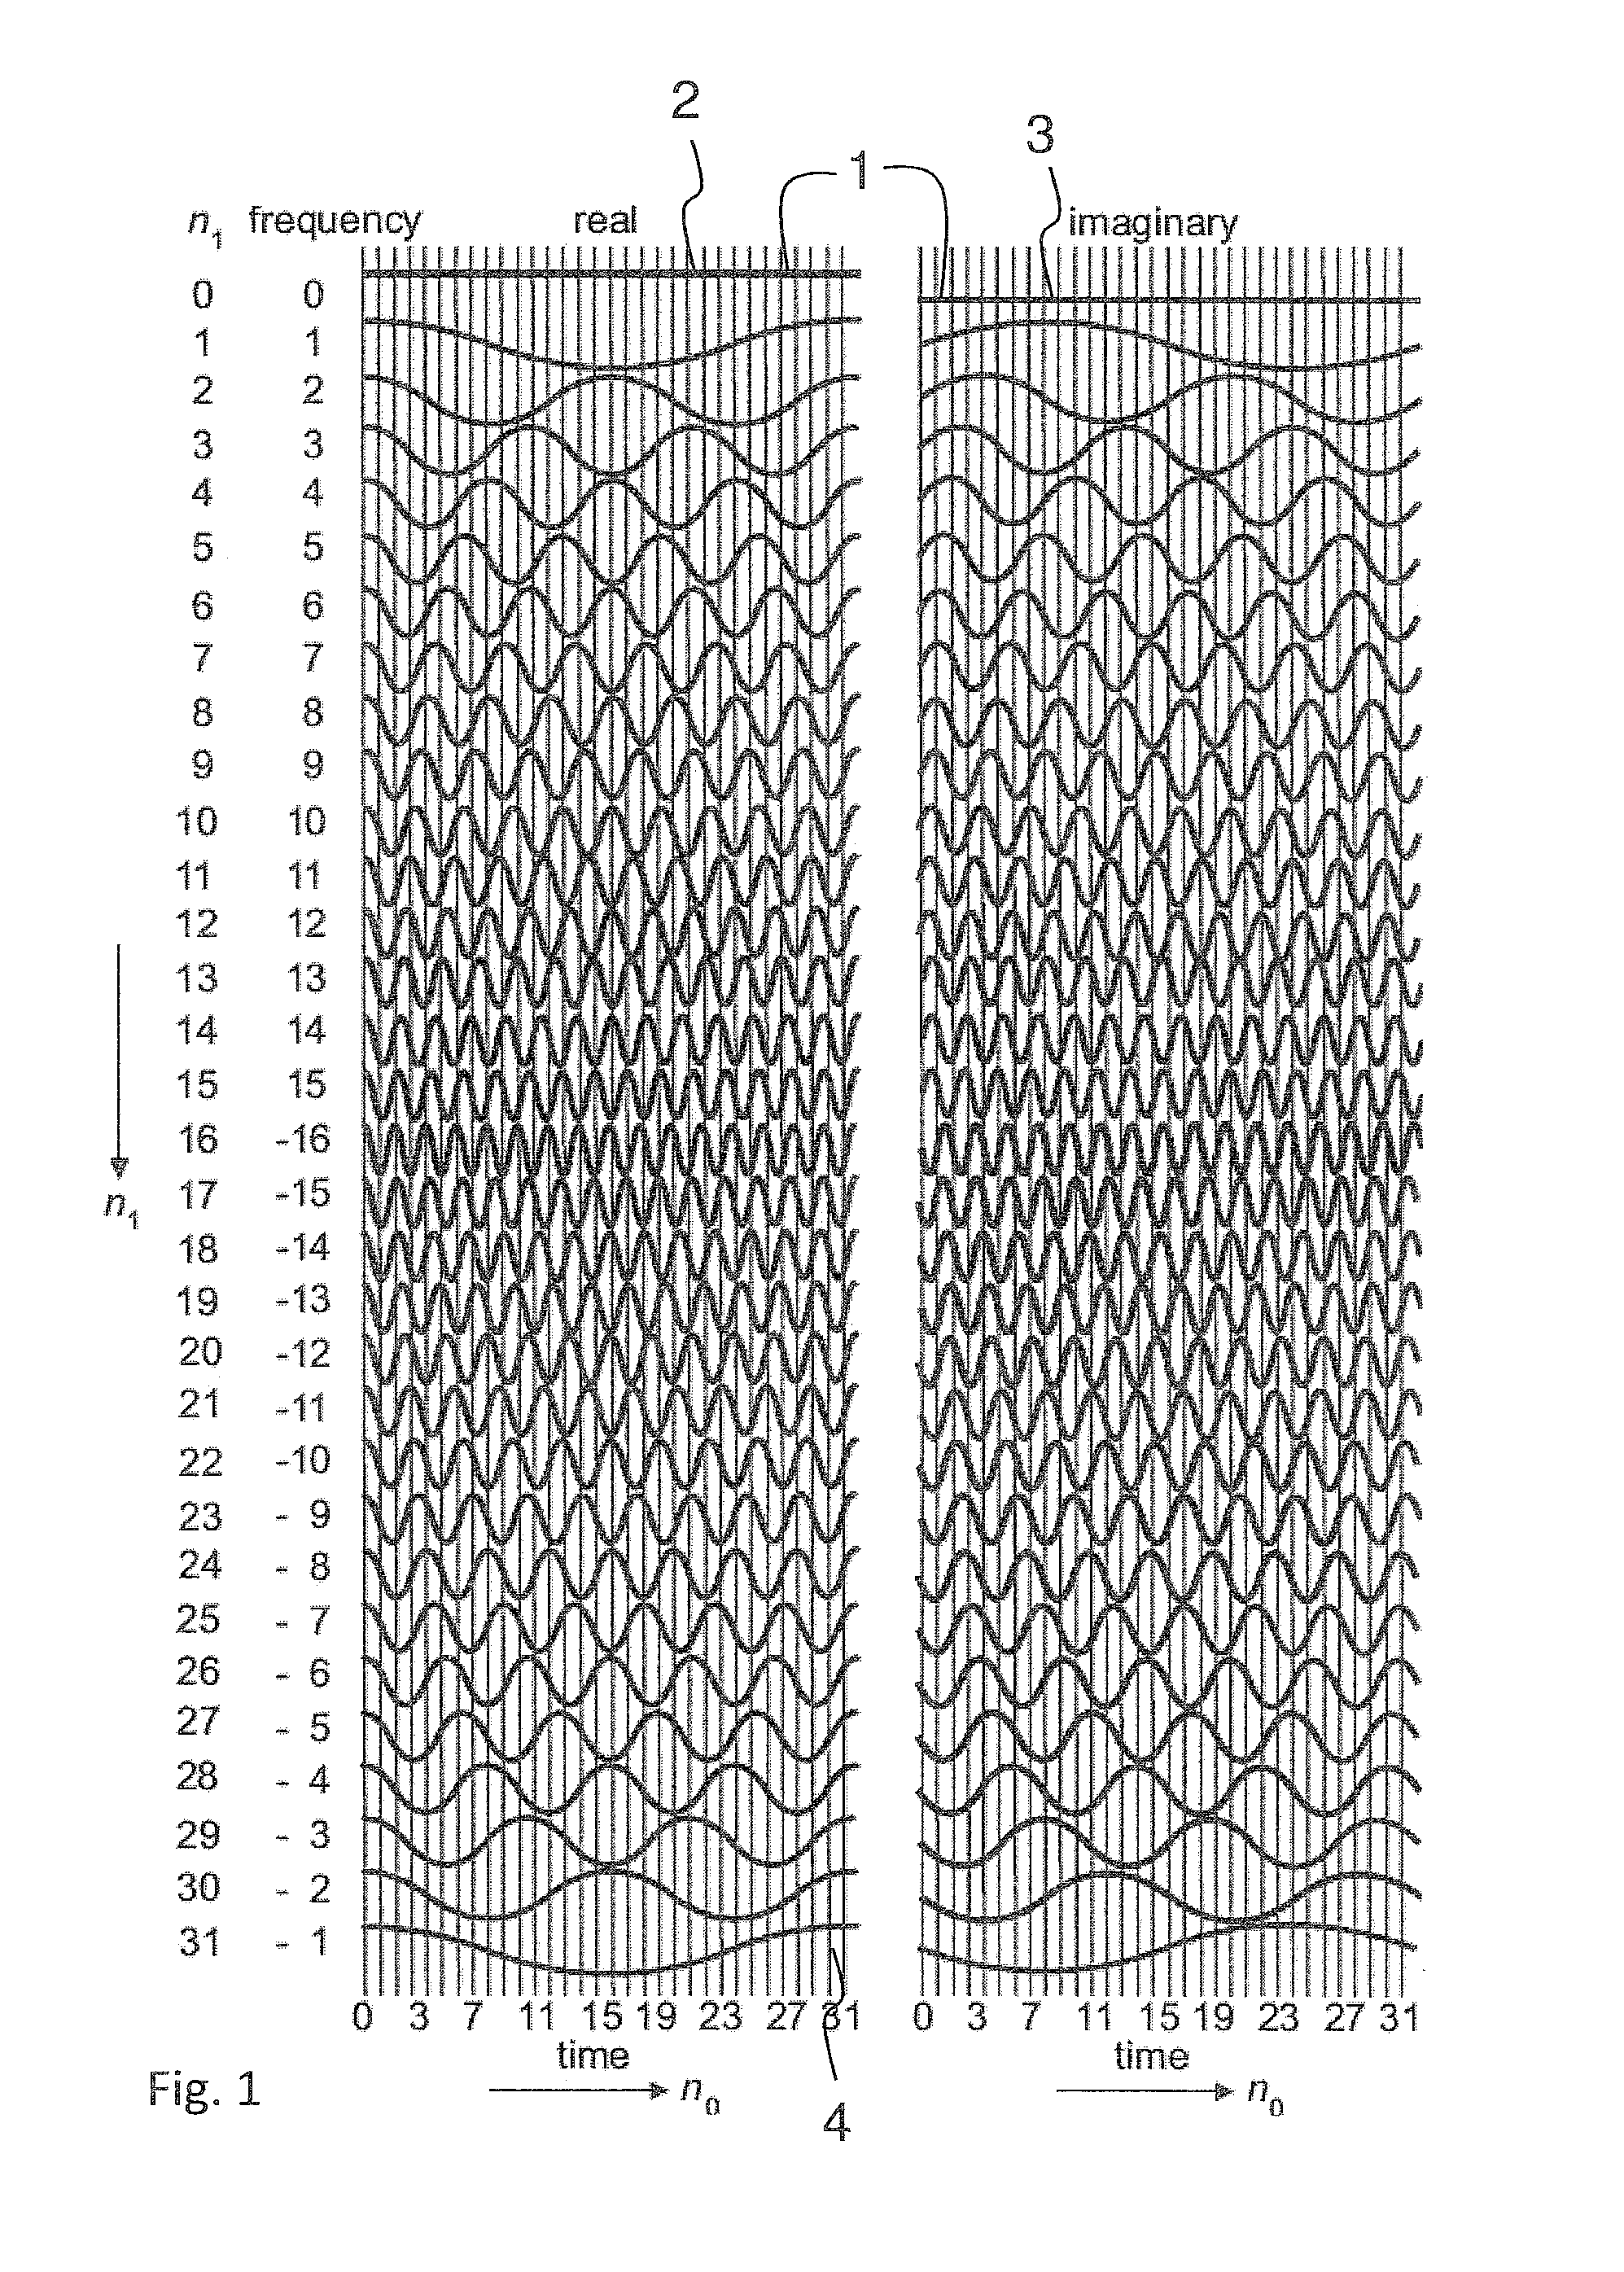 Magnetic resonance method using a phase-modulated pulse train with a constant small flip angle